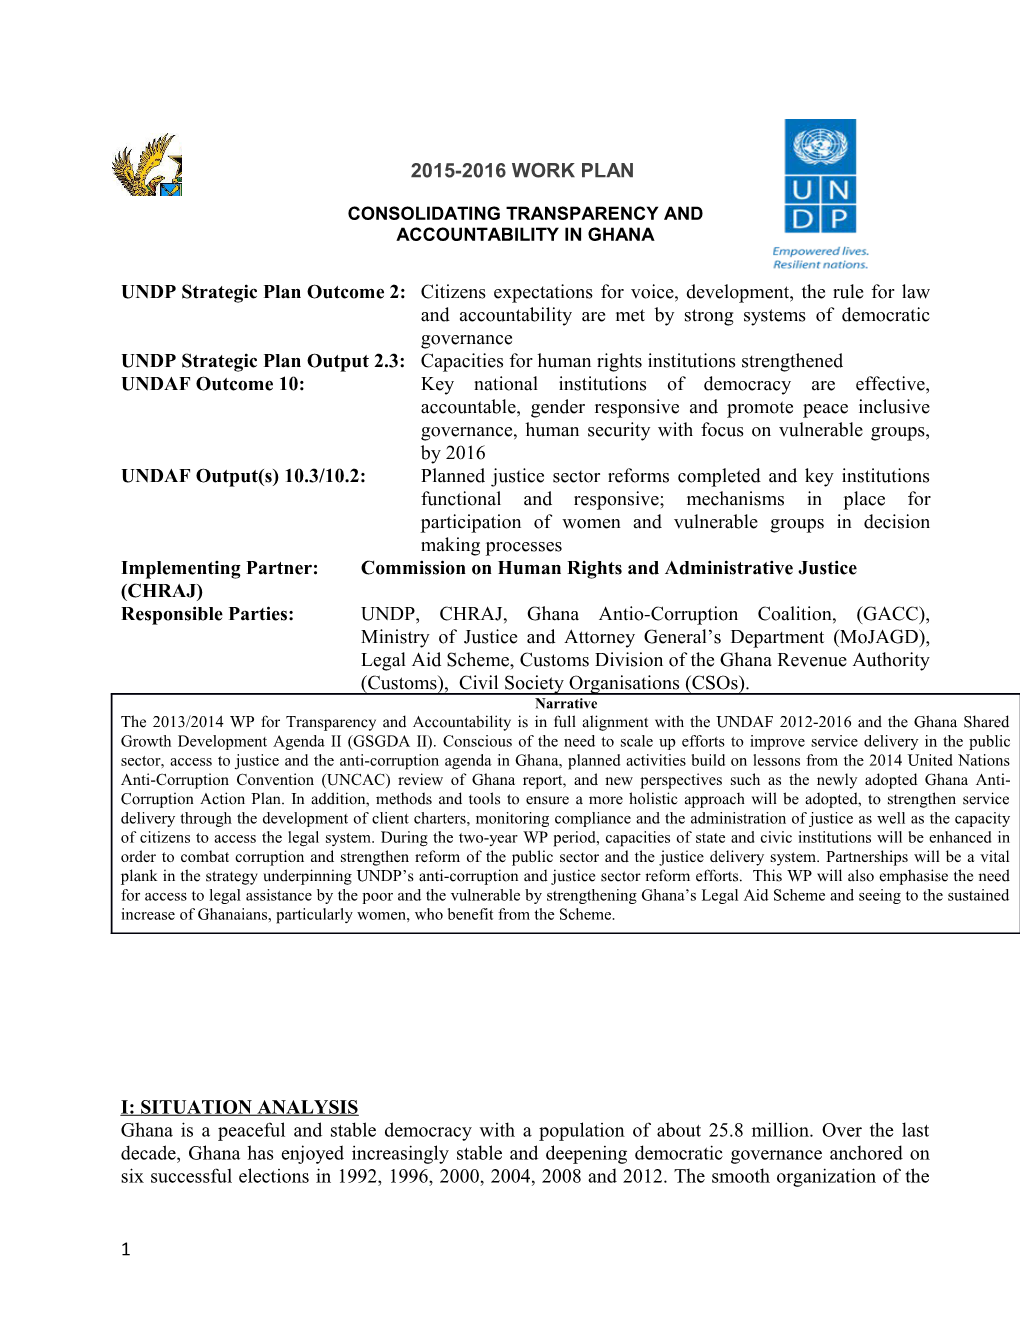 UNDP Strategic Plan Output 2.3: Capacities for Human Rights Institutions Strengthened